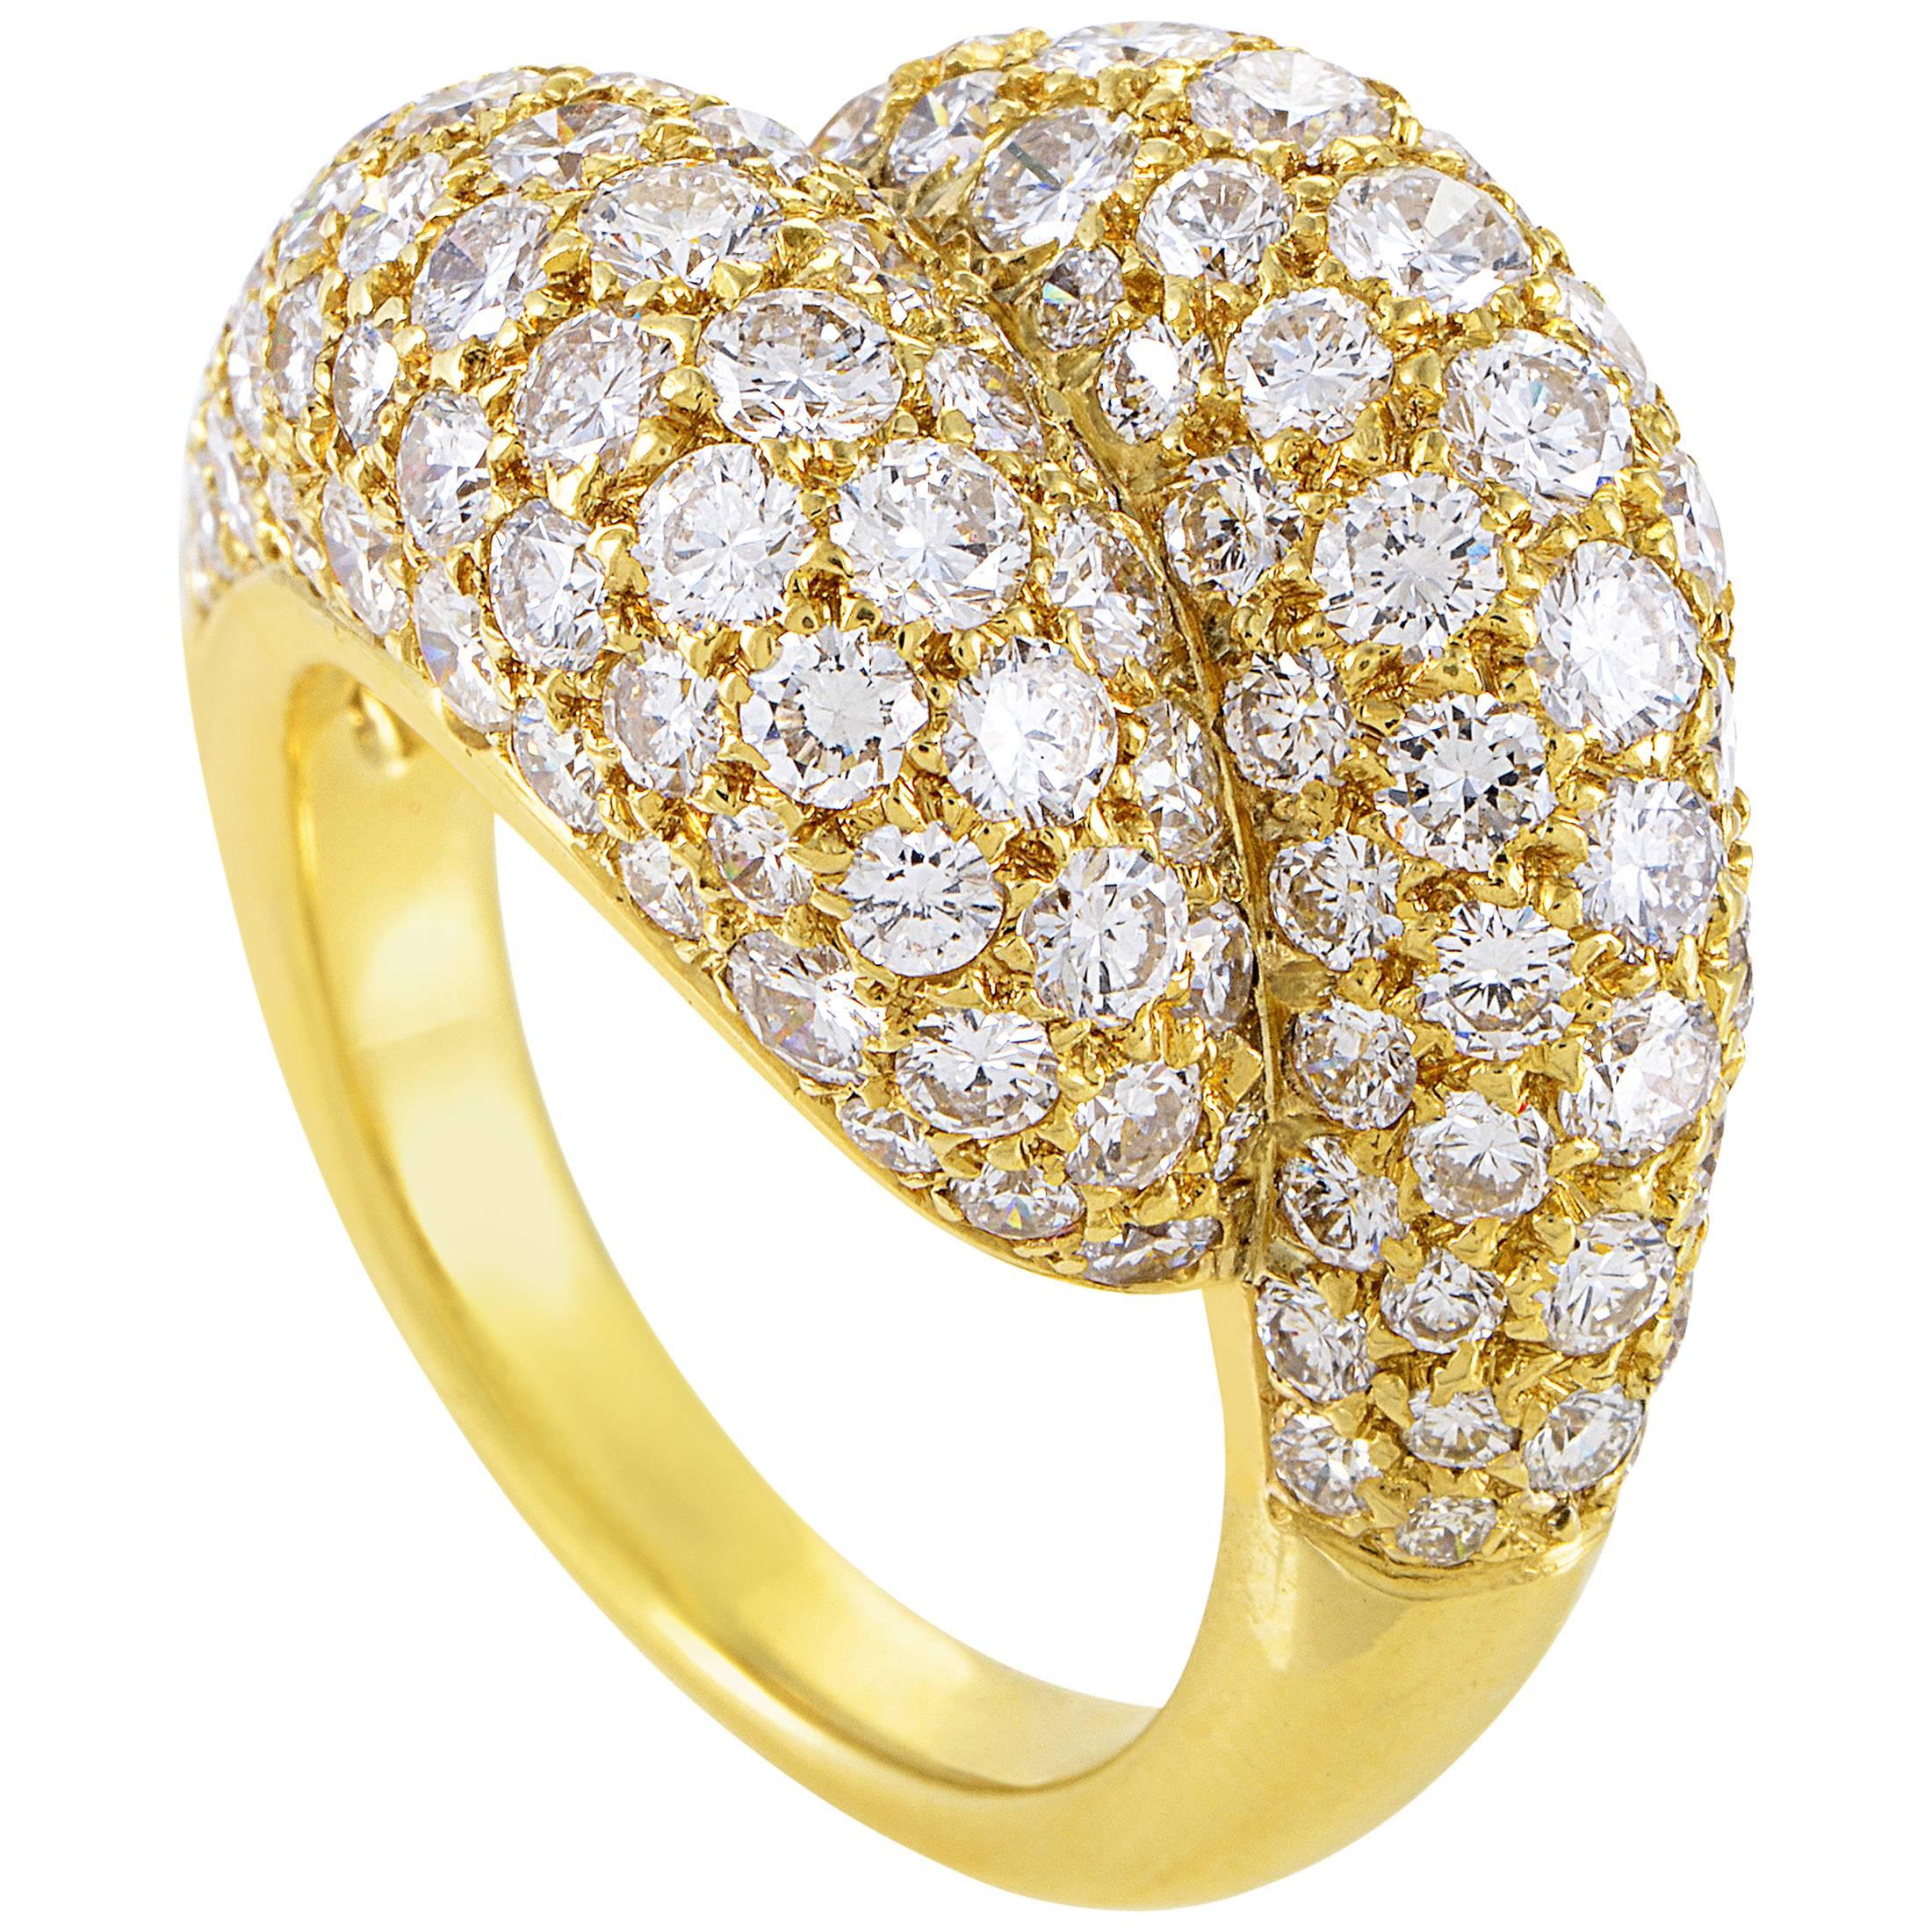 Van Cleef & Arpels Diamond Pave Gold Bypass Ring